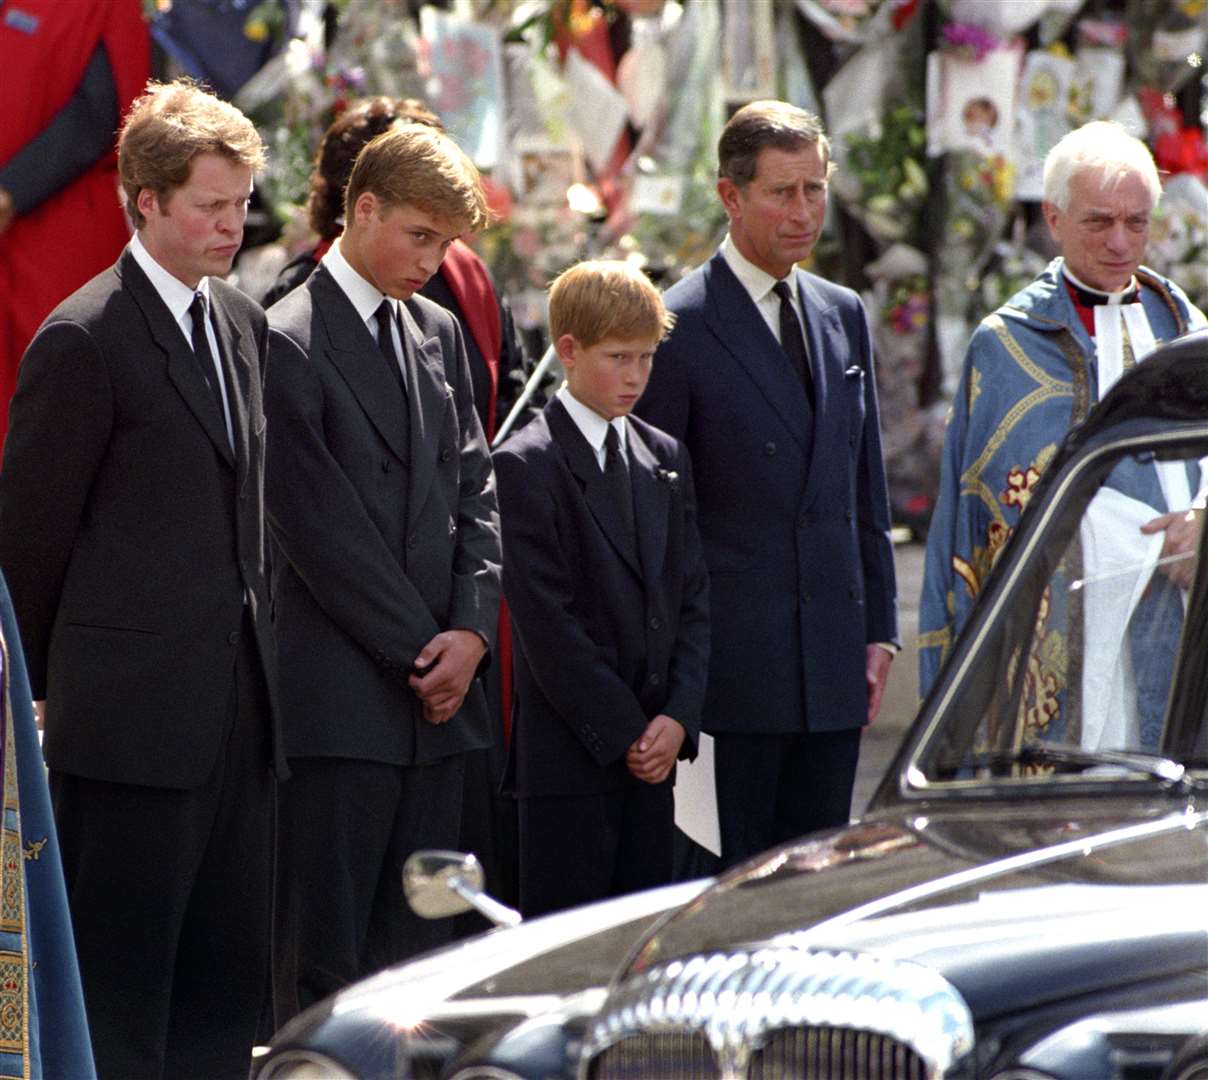 Earl Spencer, William, Harry and the then-Prince of Wales, wait as the hearse carrying the coffin of Diana, Princess of Wales, prepares to leave Westminster Abbey in 1997 (Fiona Hanson/PA)